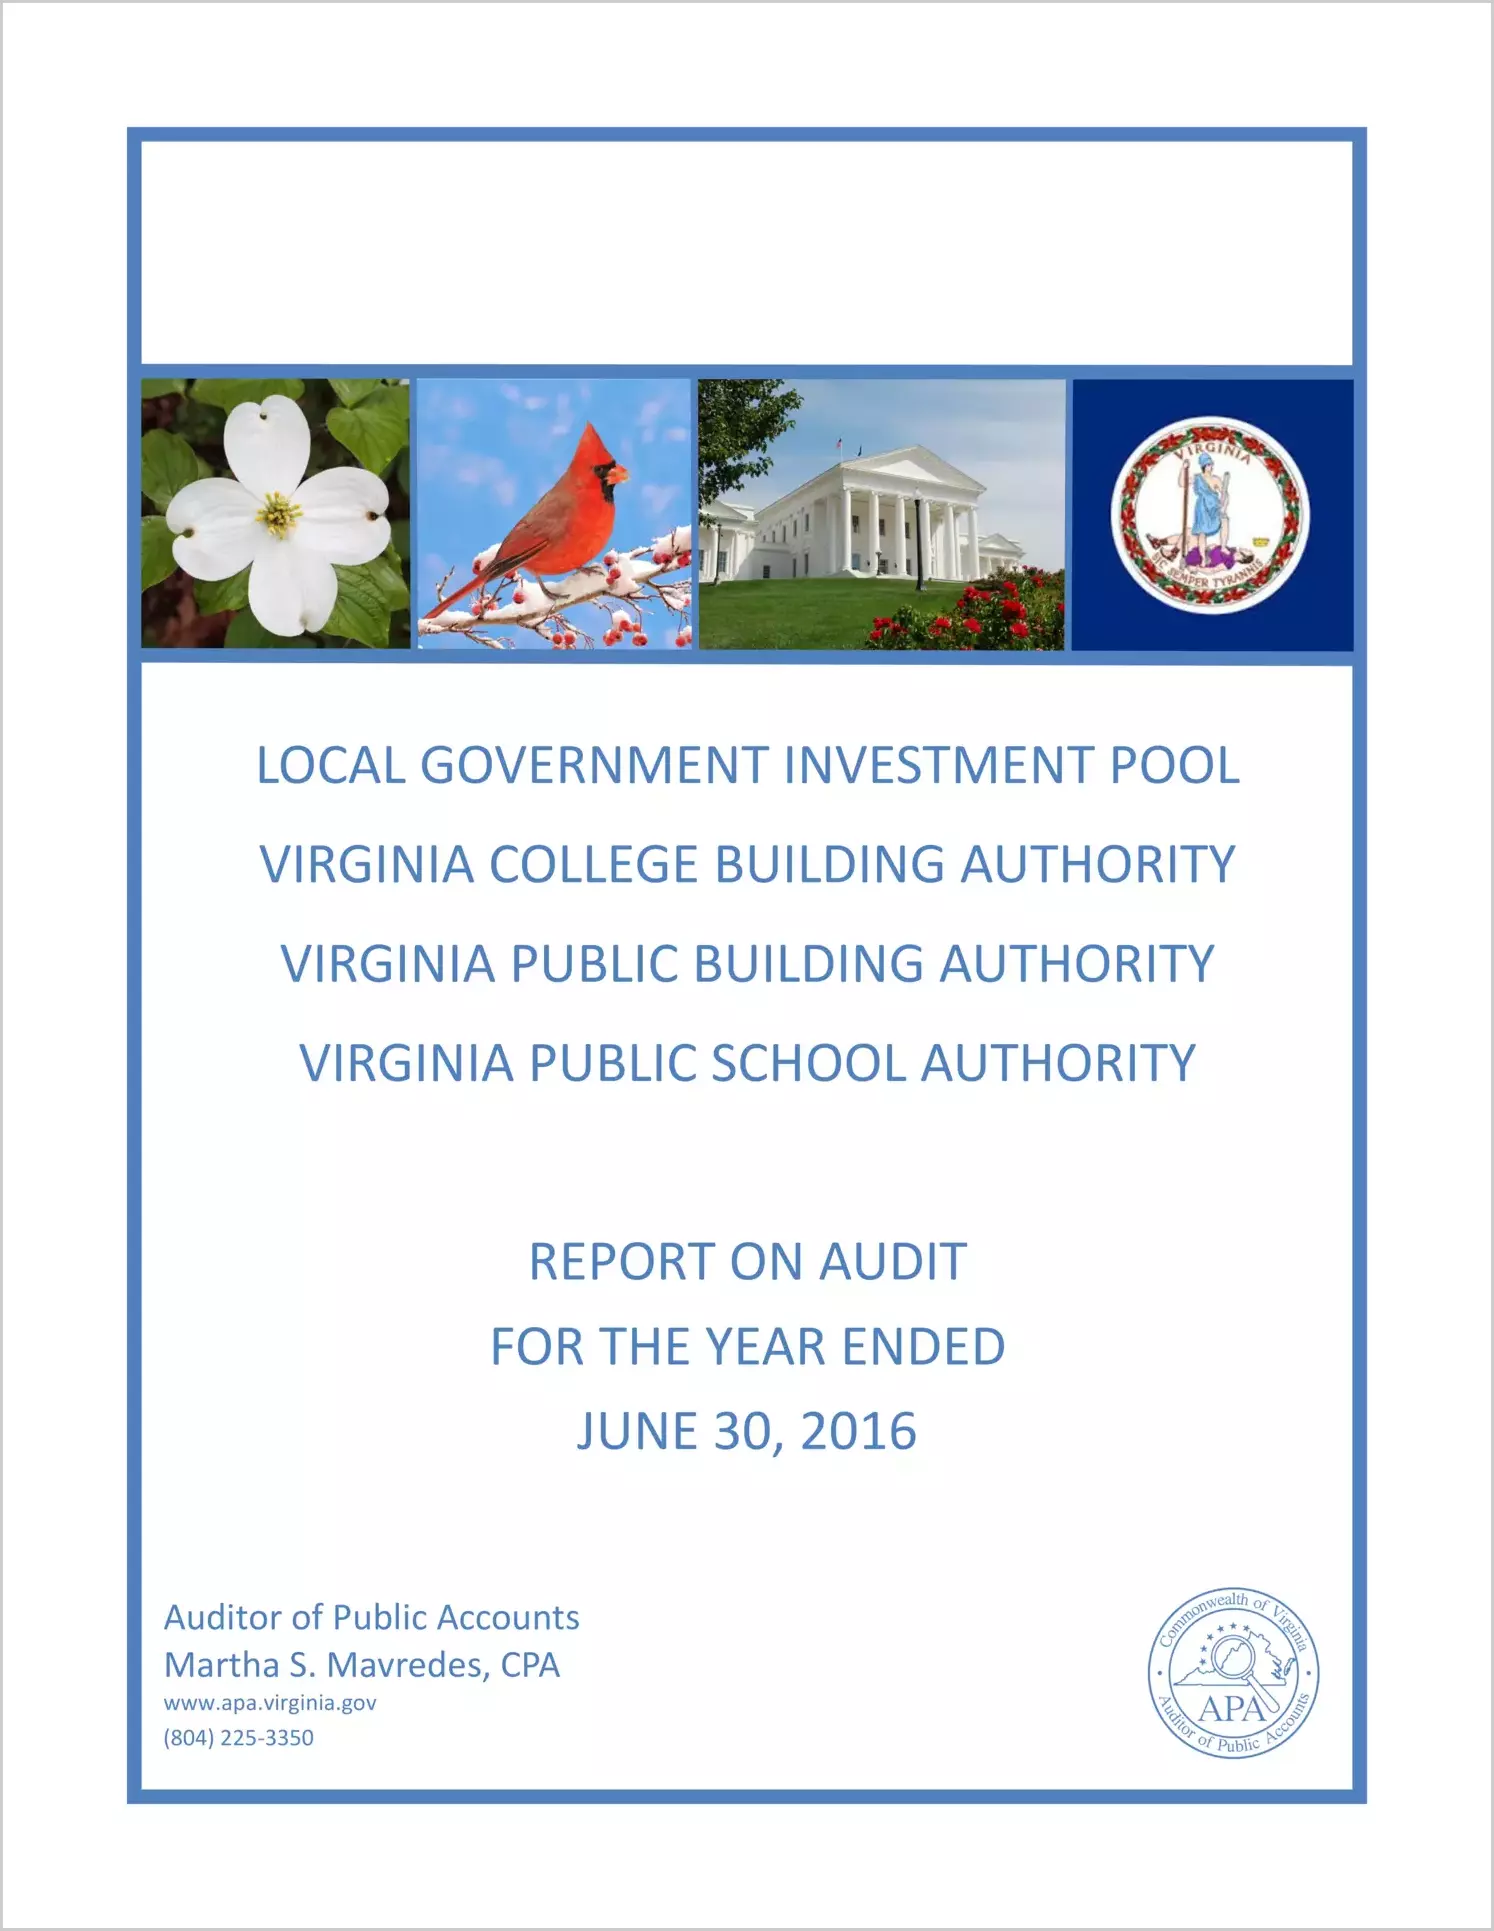 Local Government Investment Pool, Virginia College Building Authority, Virginia Public Building Authority, Virginia Public School Authority for the Year Ended June 30, 2016